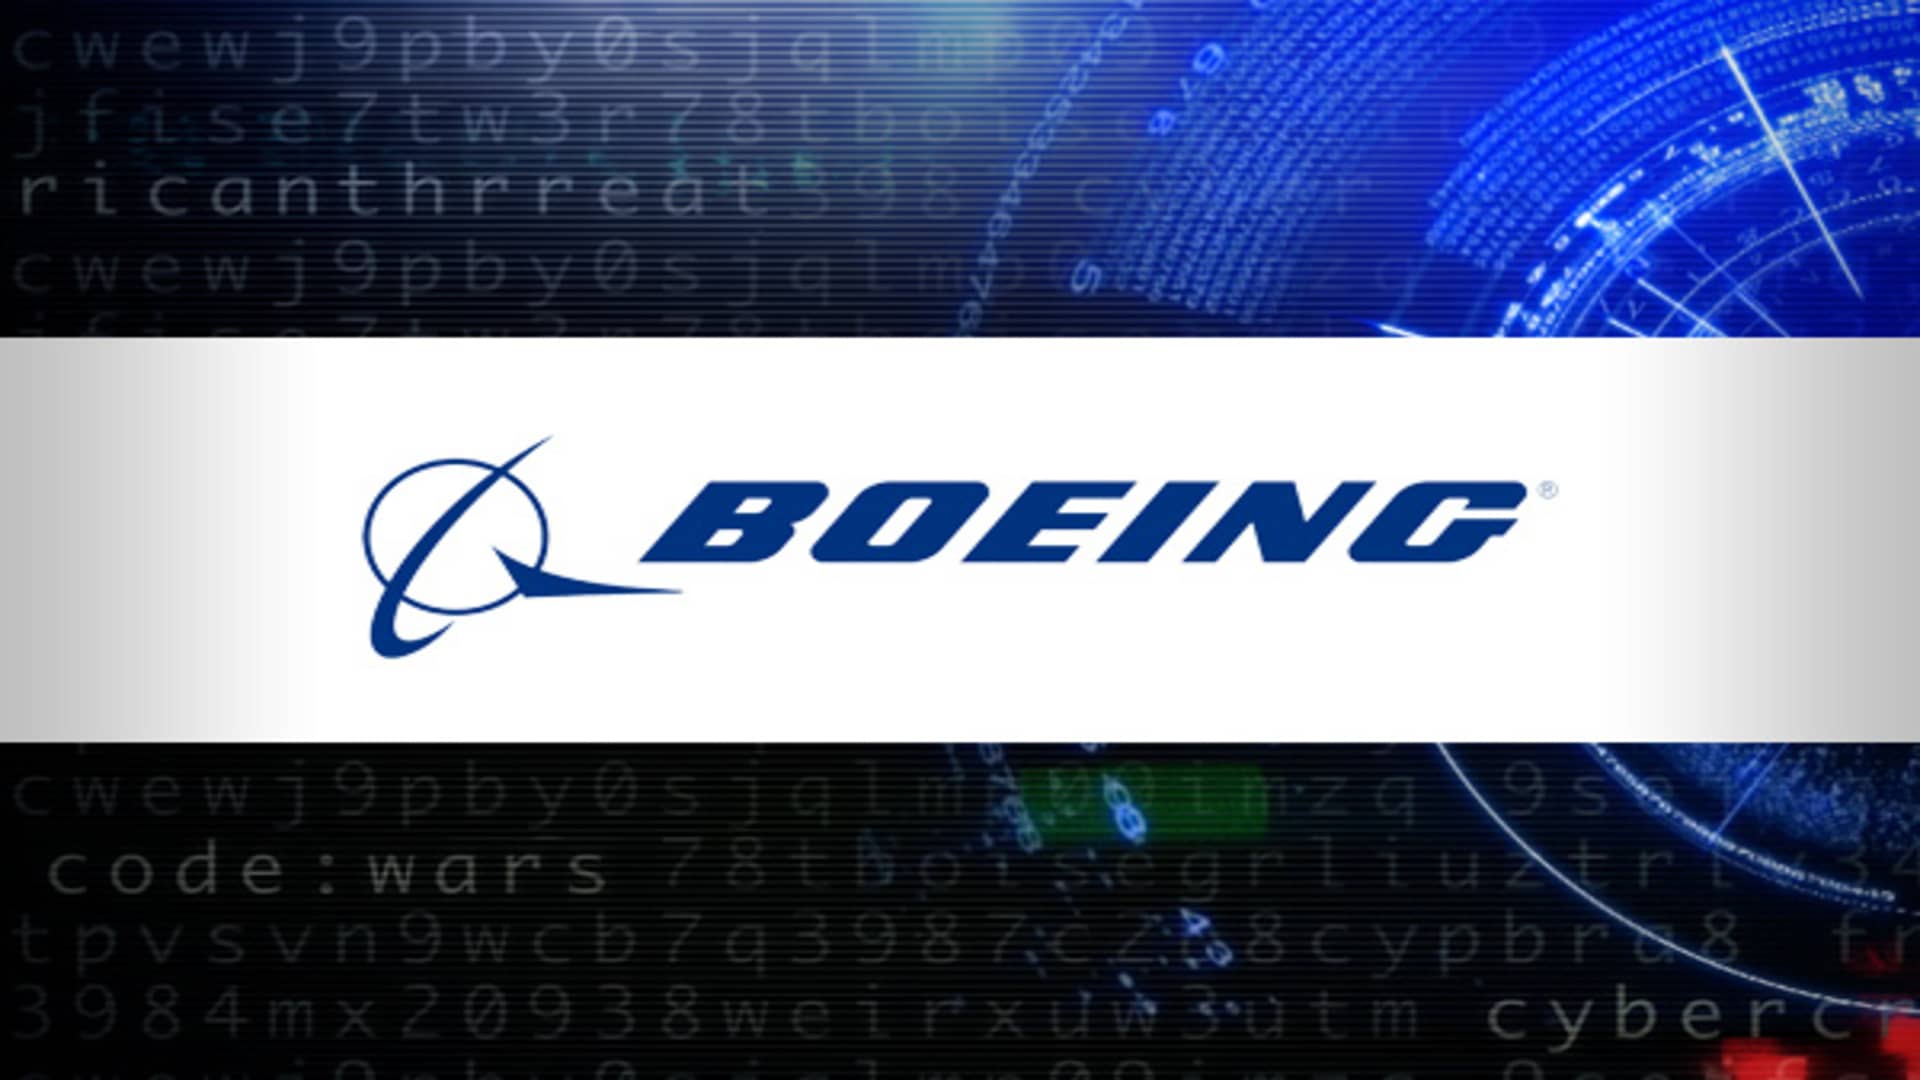 Boeing is a leading aerospace company and the largest manufacturer of commercial jetliners/military aircraft combined. Additionally, BA designs and manufactures rotorcraft, electronic and defense systems, missiles, satellites, launch vehicles and advanced information and communication systems. The company also provides numerous military and commercial airline support services.Hamilton says that cyber is a small component of BA’s, but a focus nonetheless, especially with the recent acquisition of